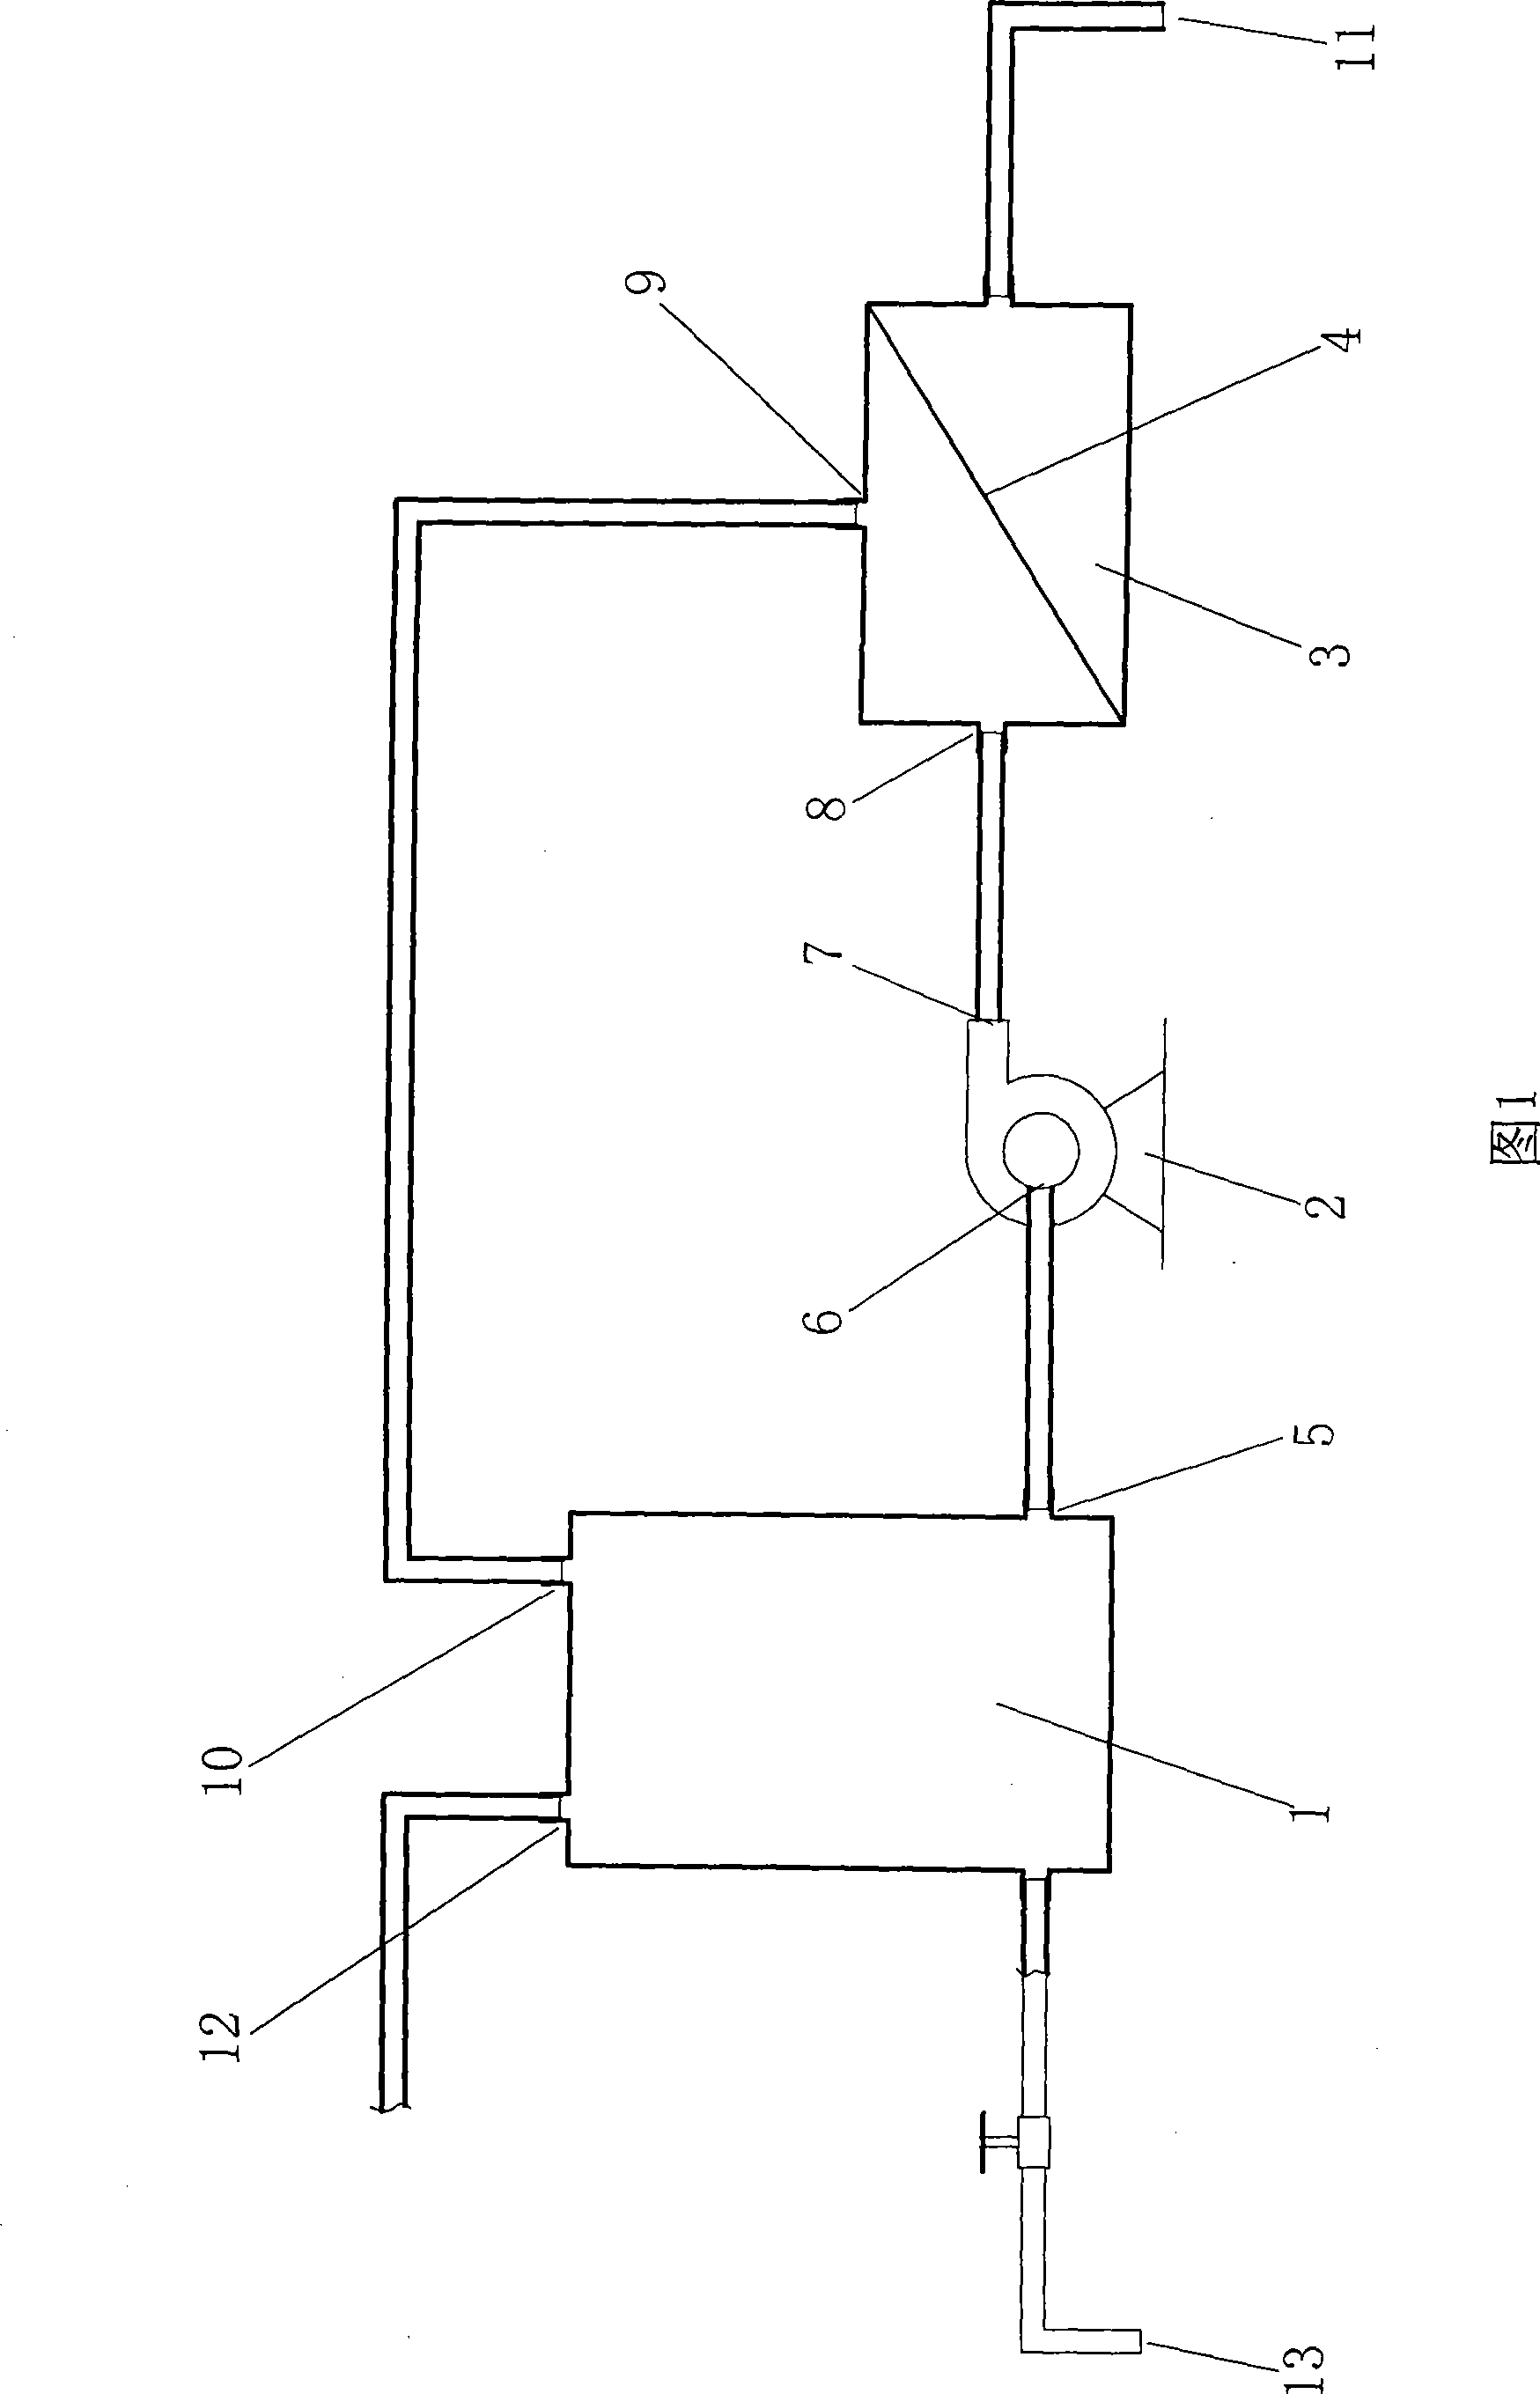 Method for adjusting and controlling chlorate and nitrate in tobacco extract